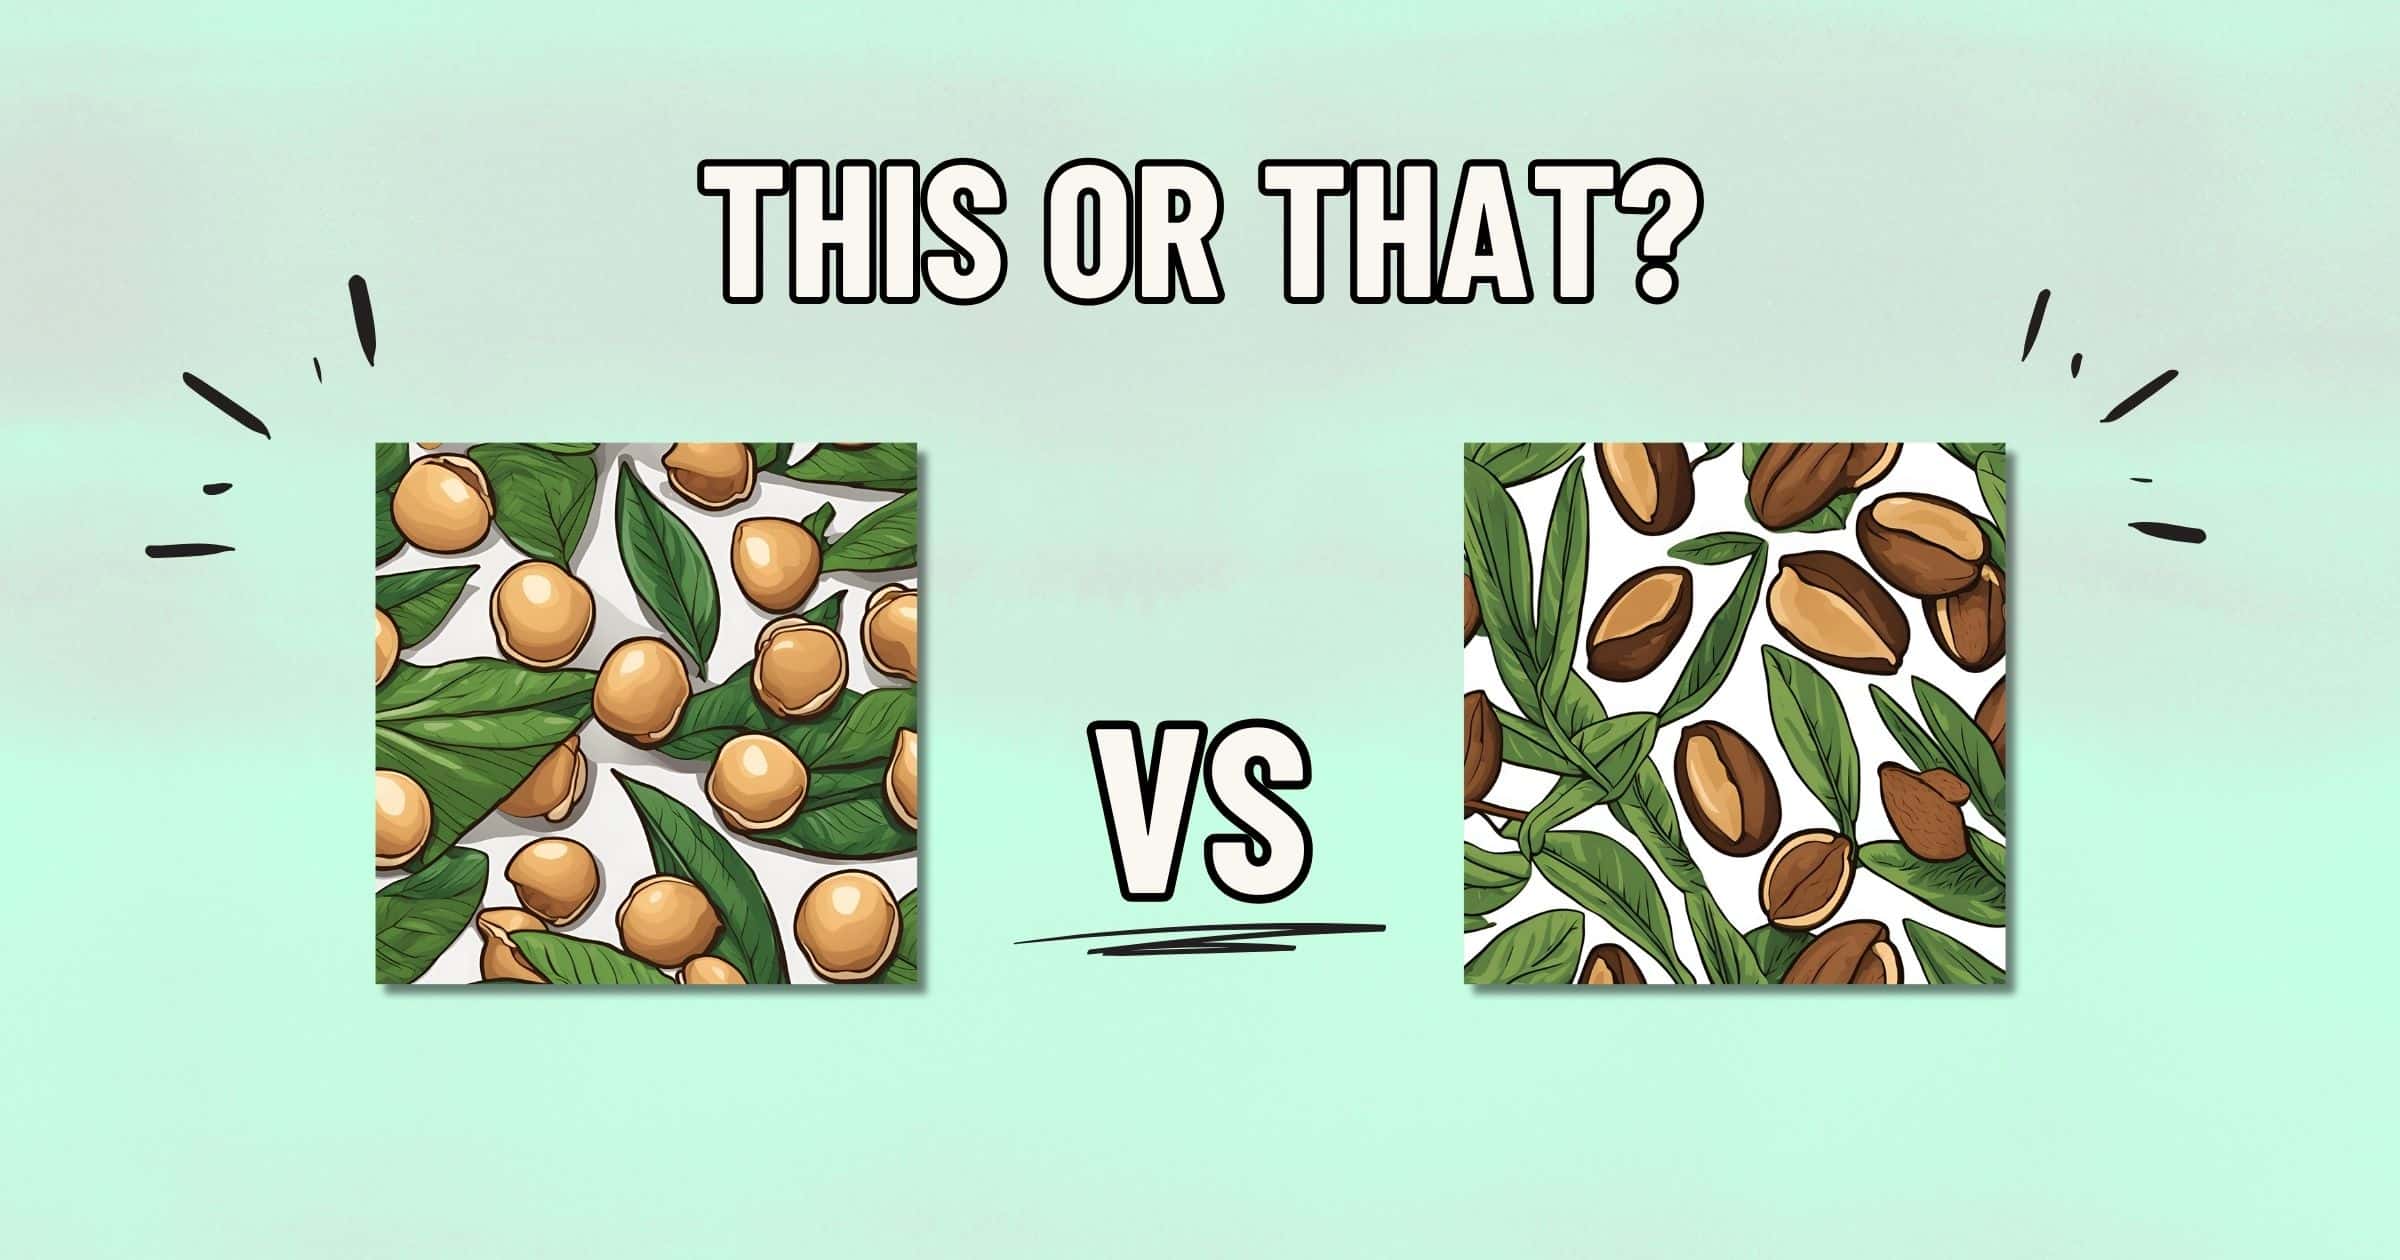 A comparison image with text "This or That?" at the top. On the left, there is an illustration of light brown berries among green leaves. On the right, there is an illustration of Brazil nuts among green leaves. The images are separated by "VS". Which do you think is healthier?